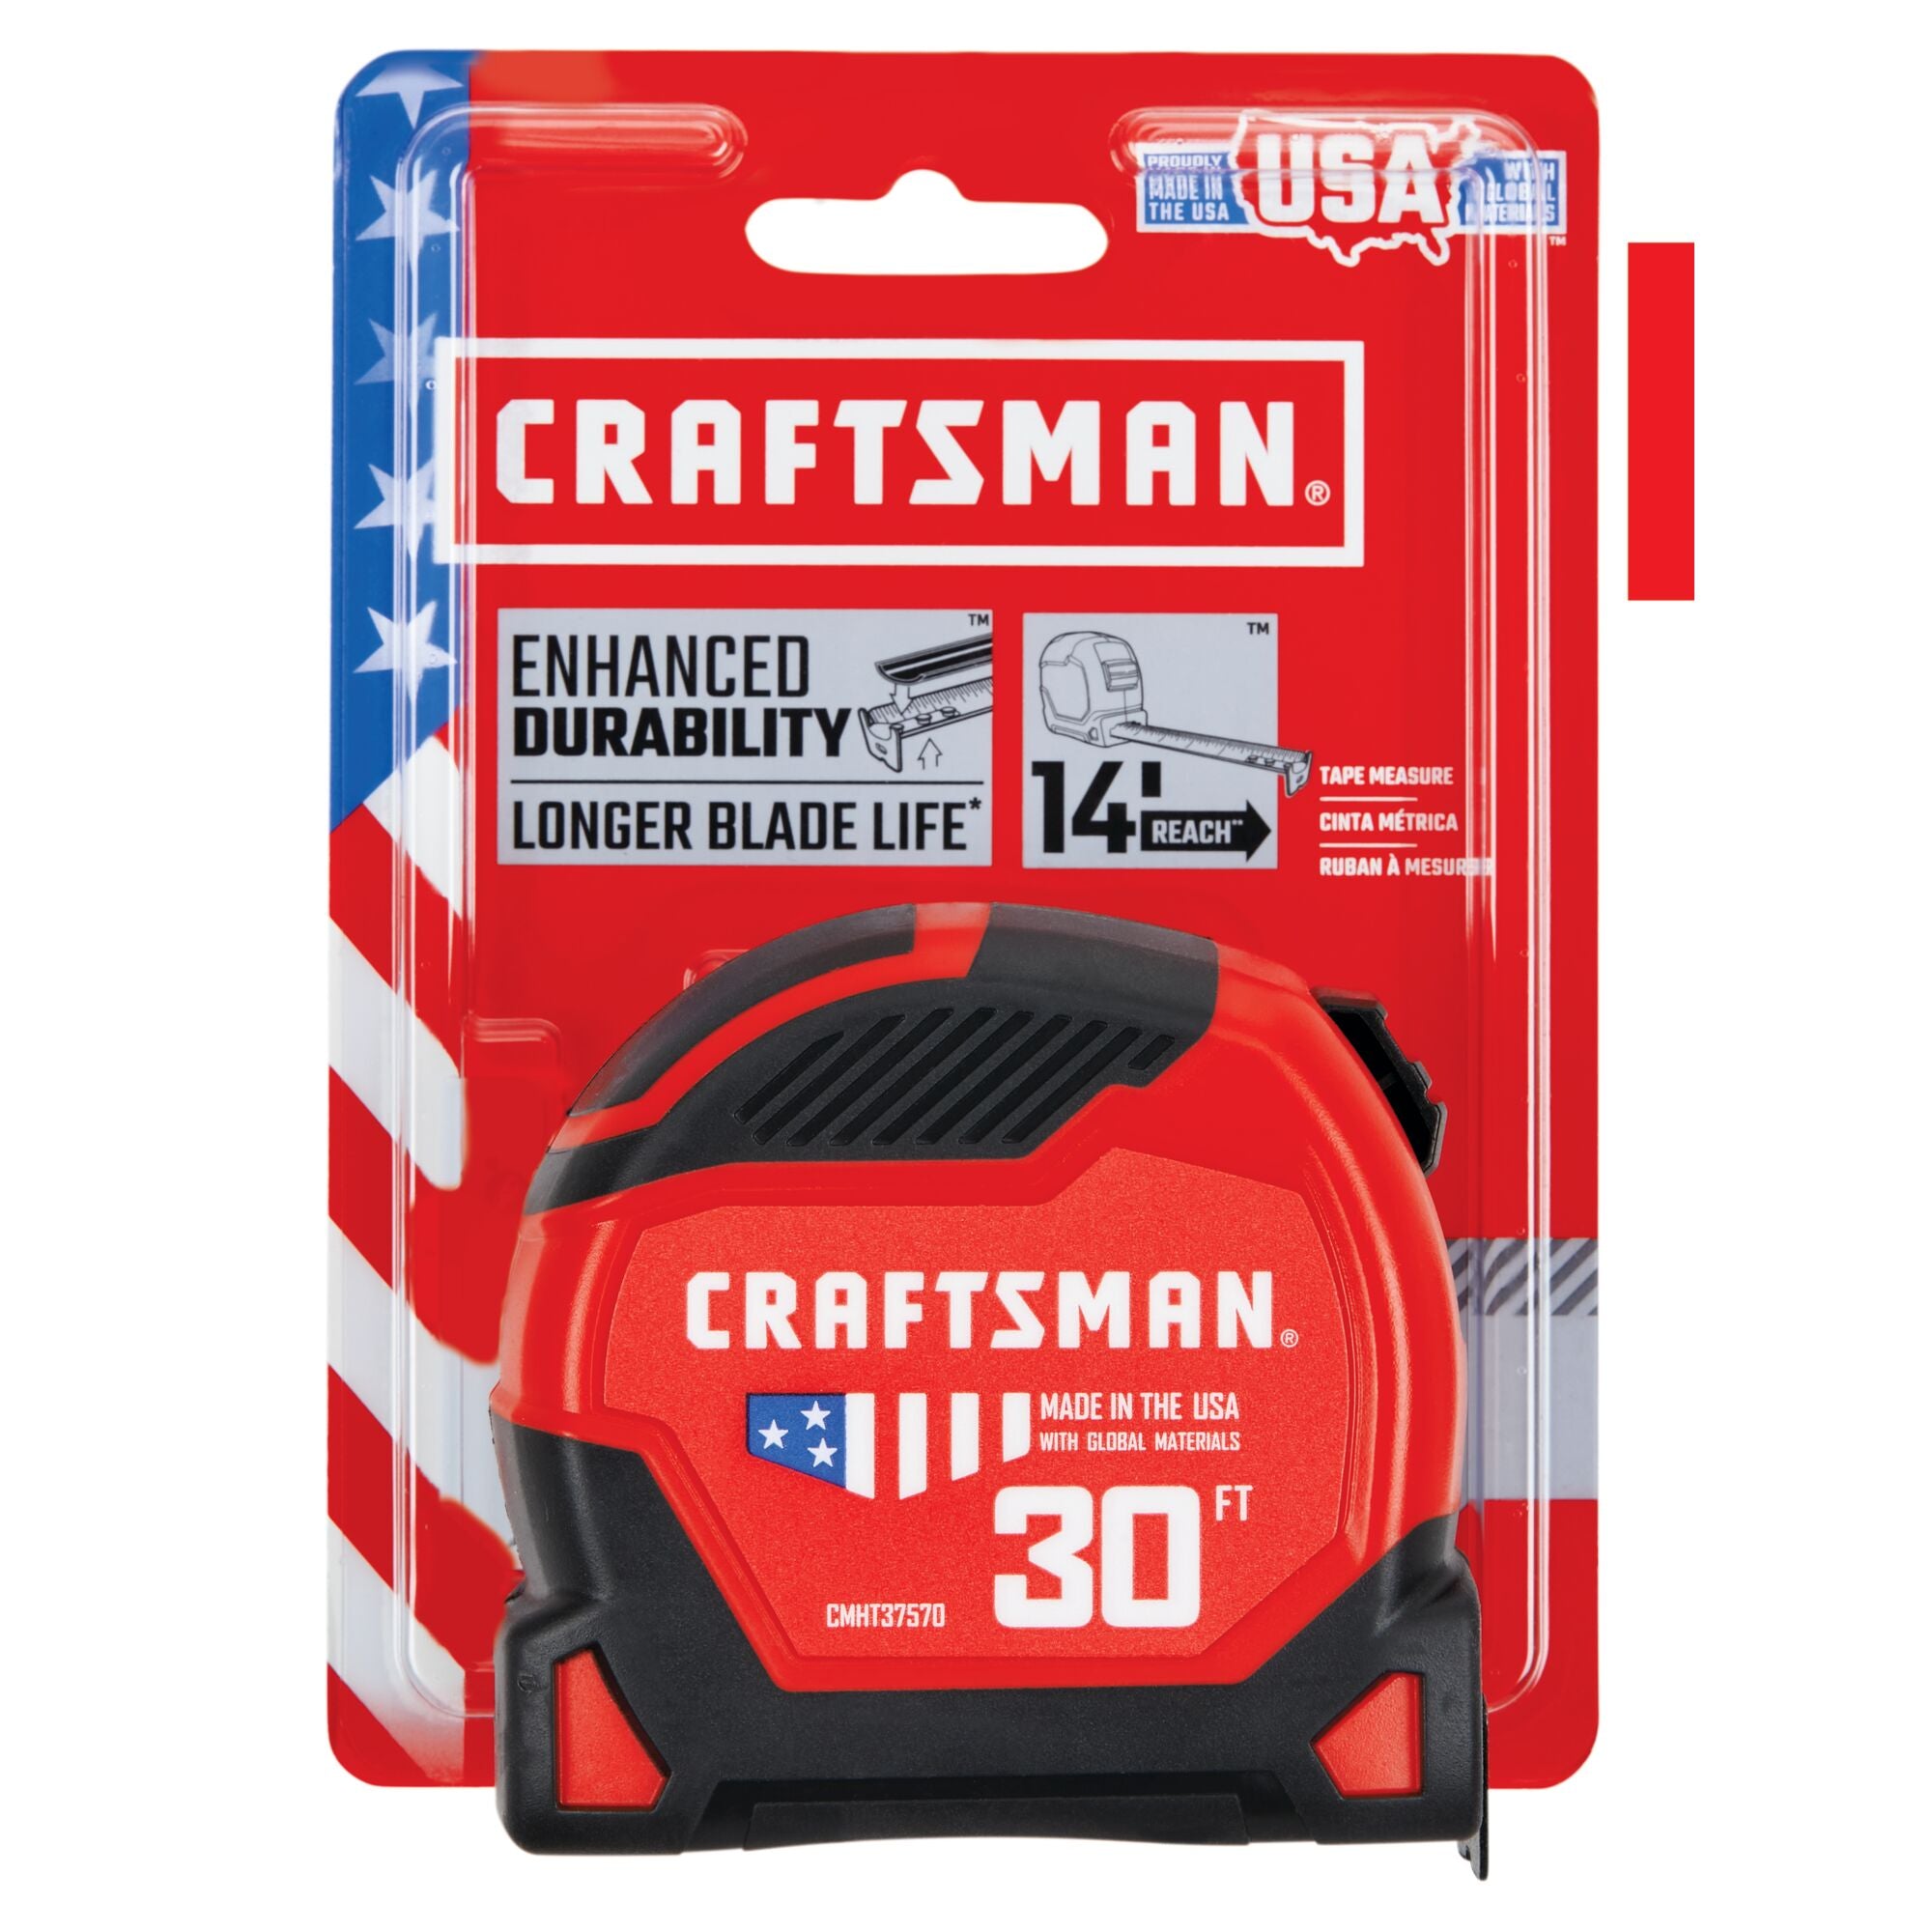 CRAFTSMAN CHROMELOCK 30-ft Auto Lock Tape Measure in the Tape